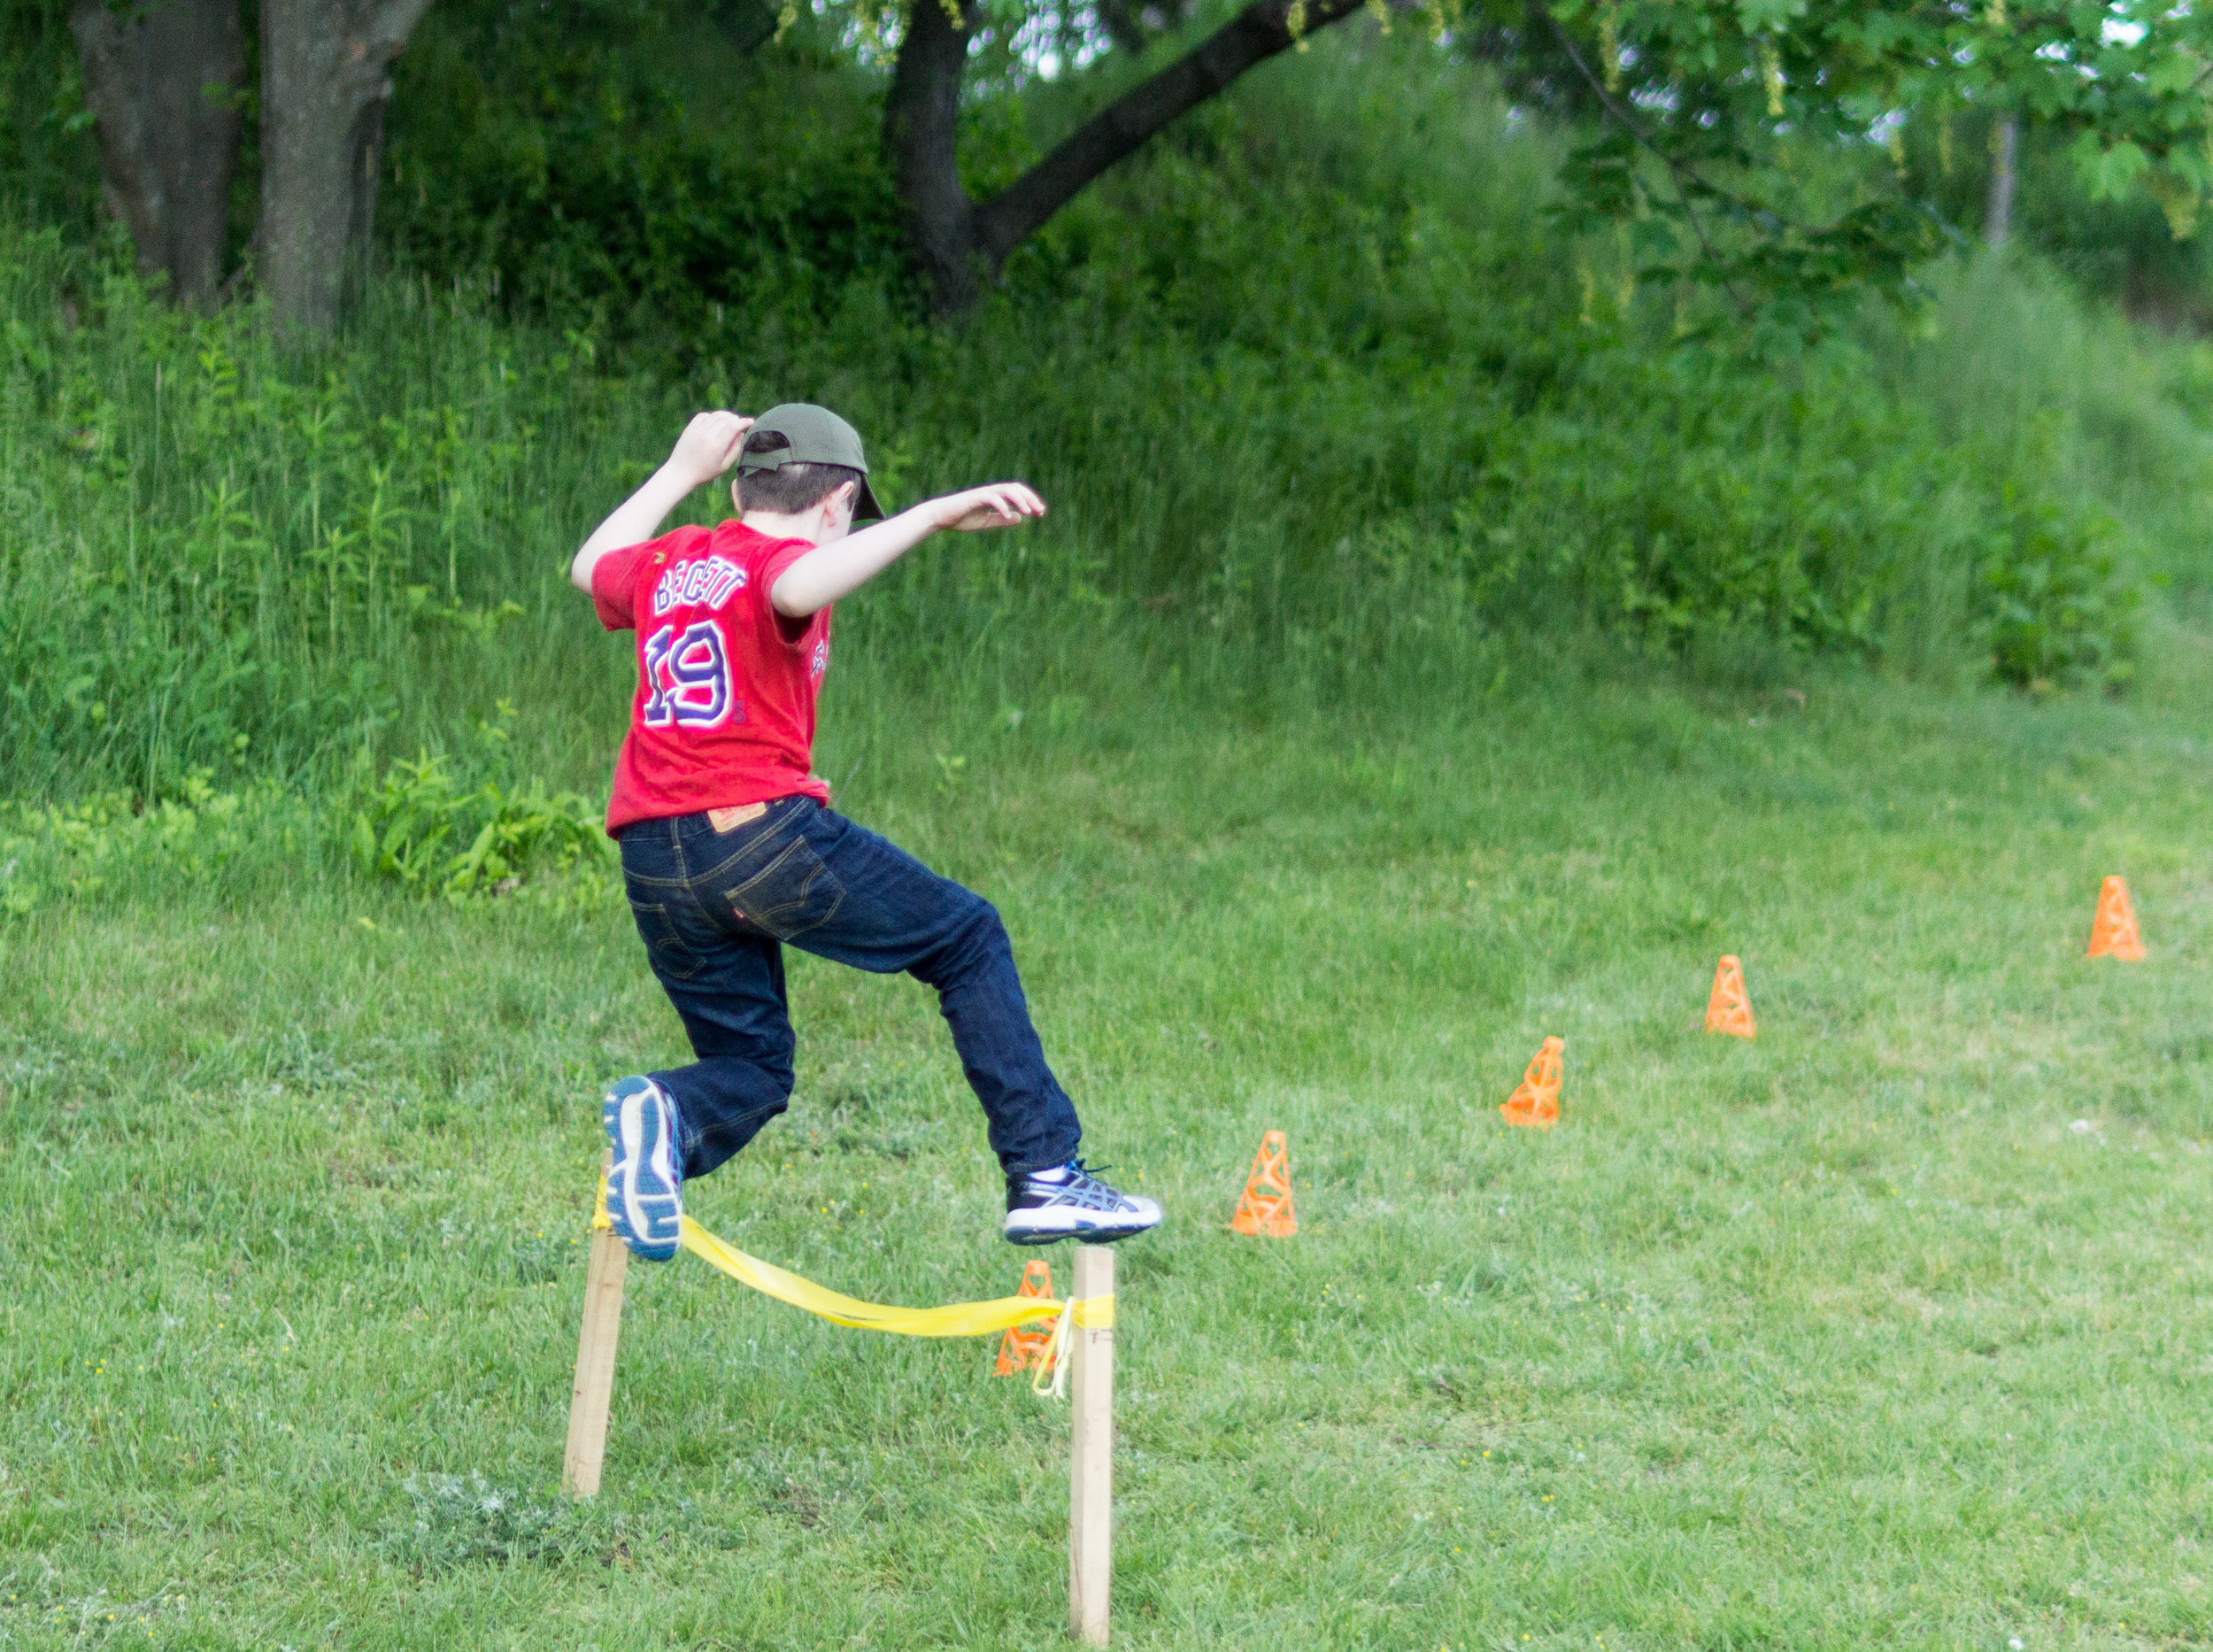 Cub Scouts Obstacle Course_22.jpg